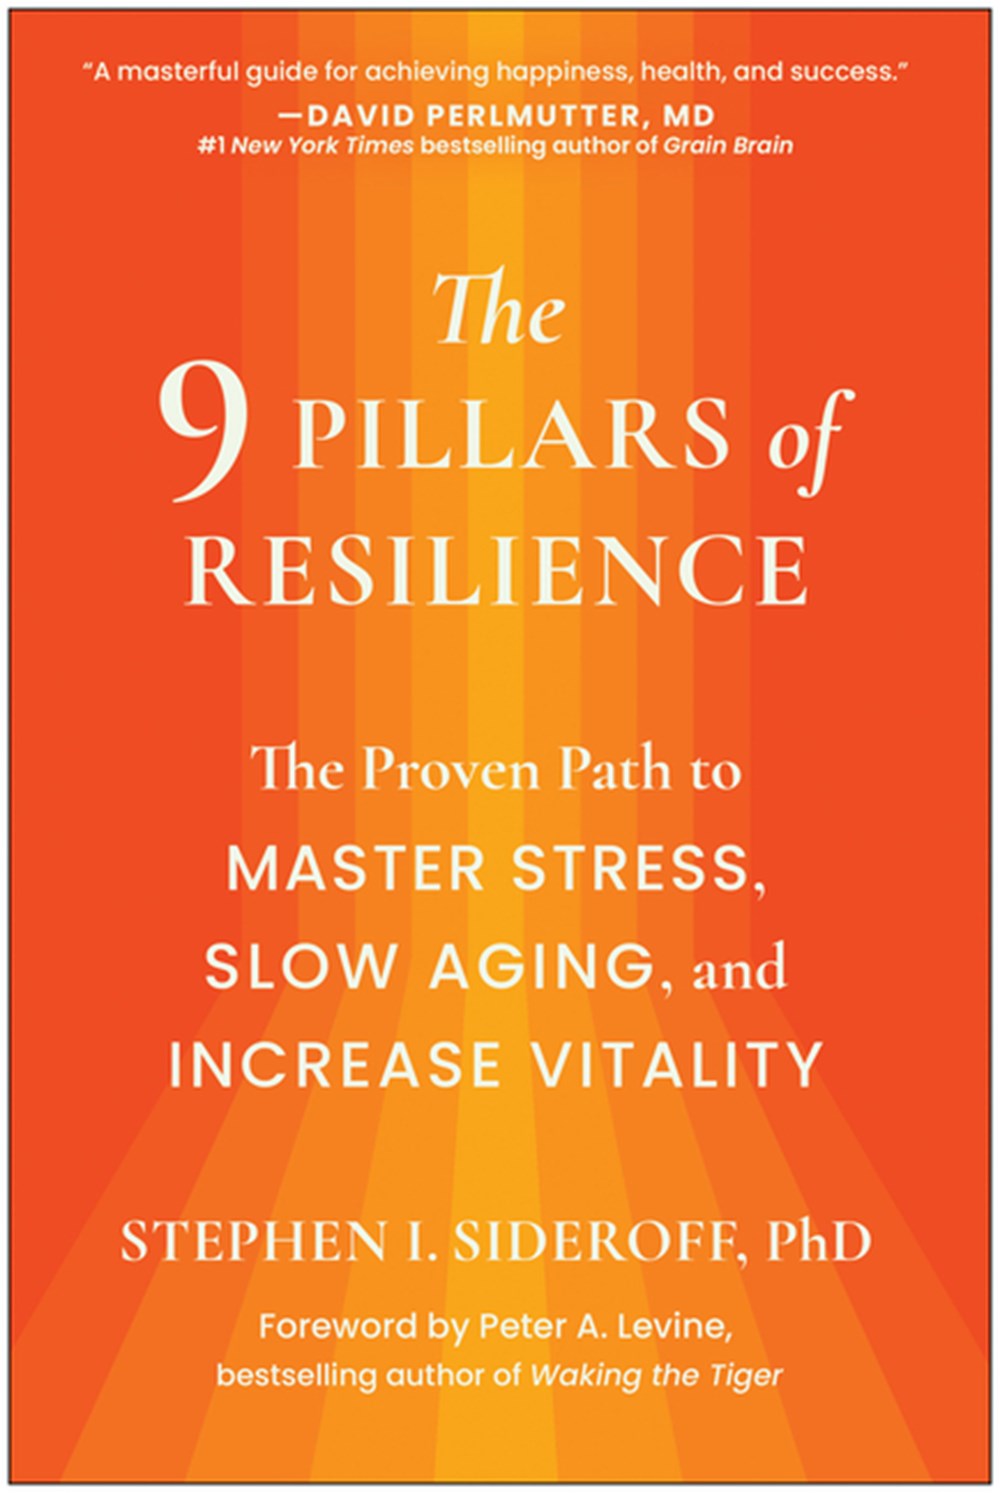 9 Pillars of Resilience: The Proven Path to Master Stress, Slow Aging, and Increase Vitality